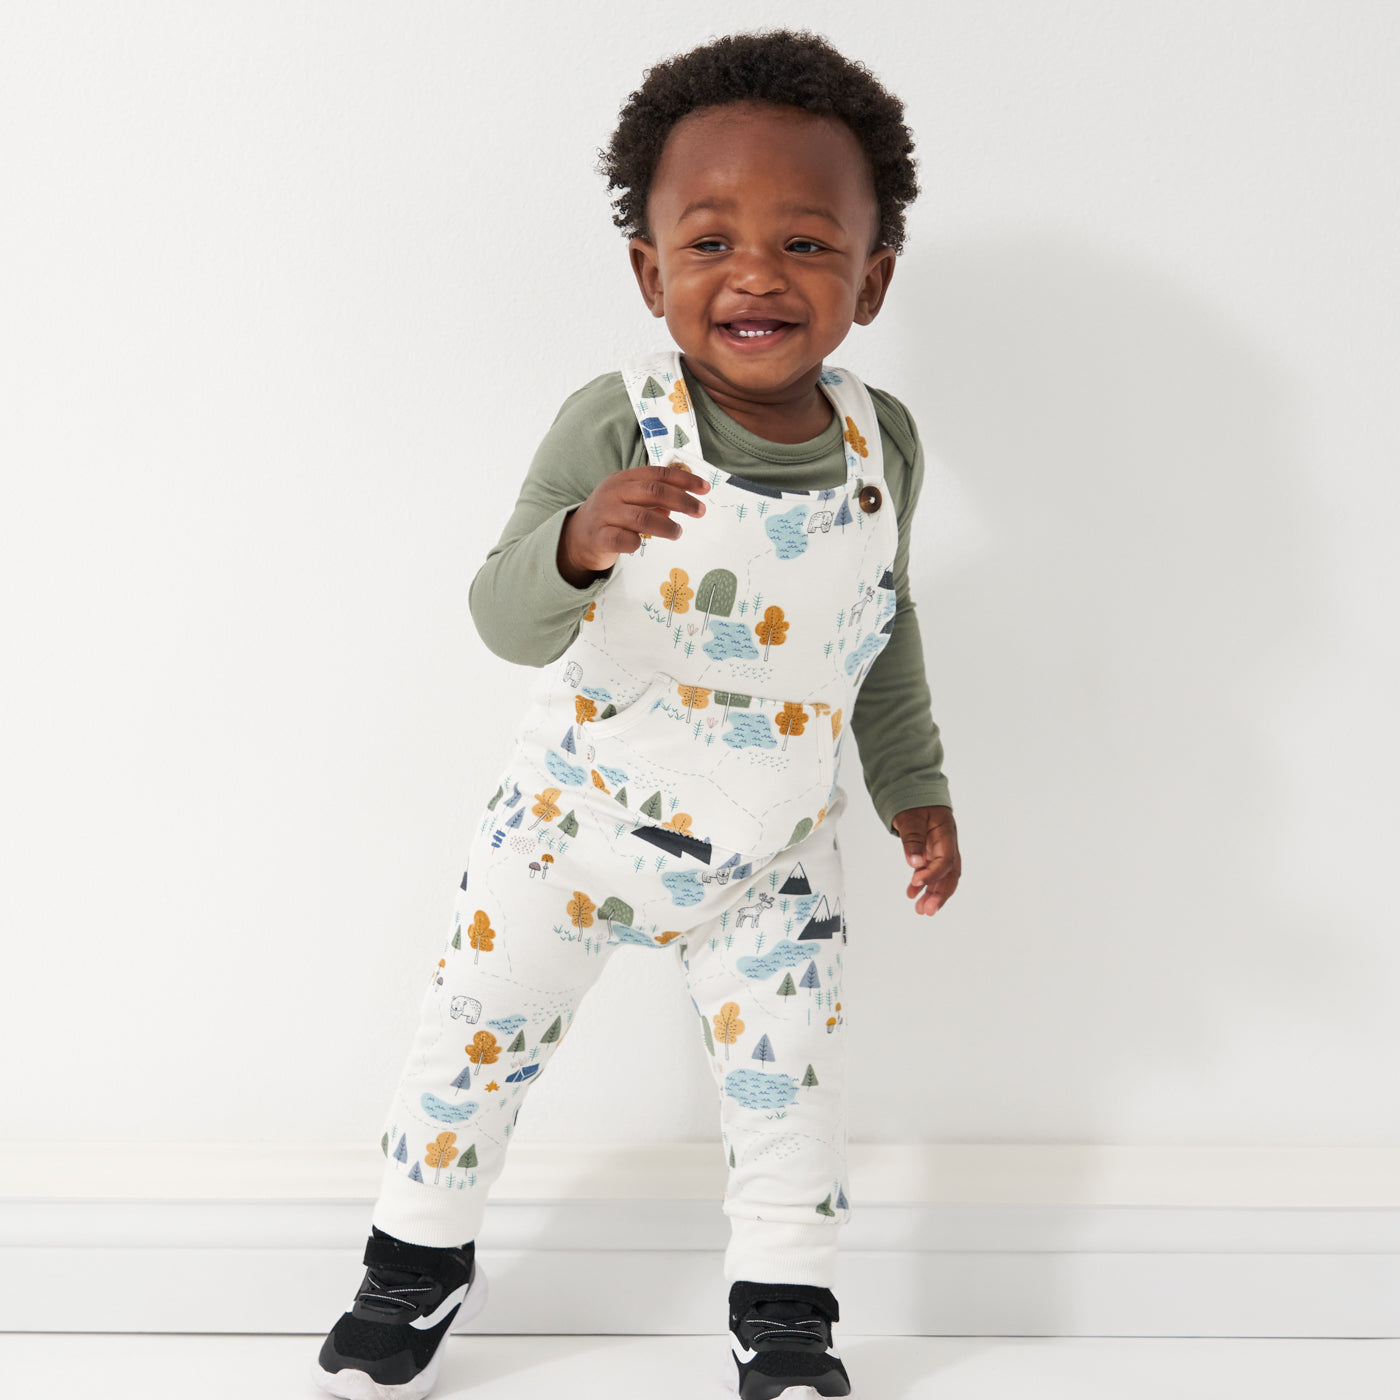 Child wearing Let's Explore printed overalls